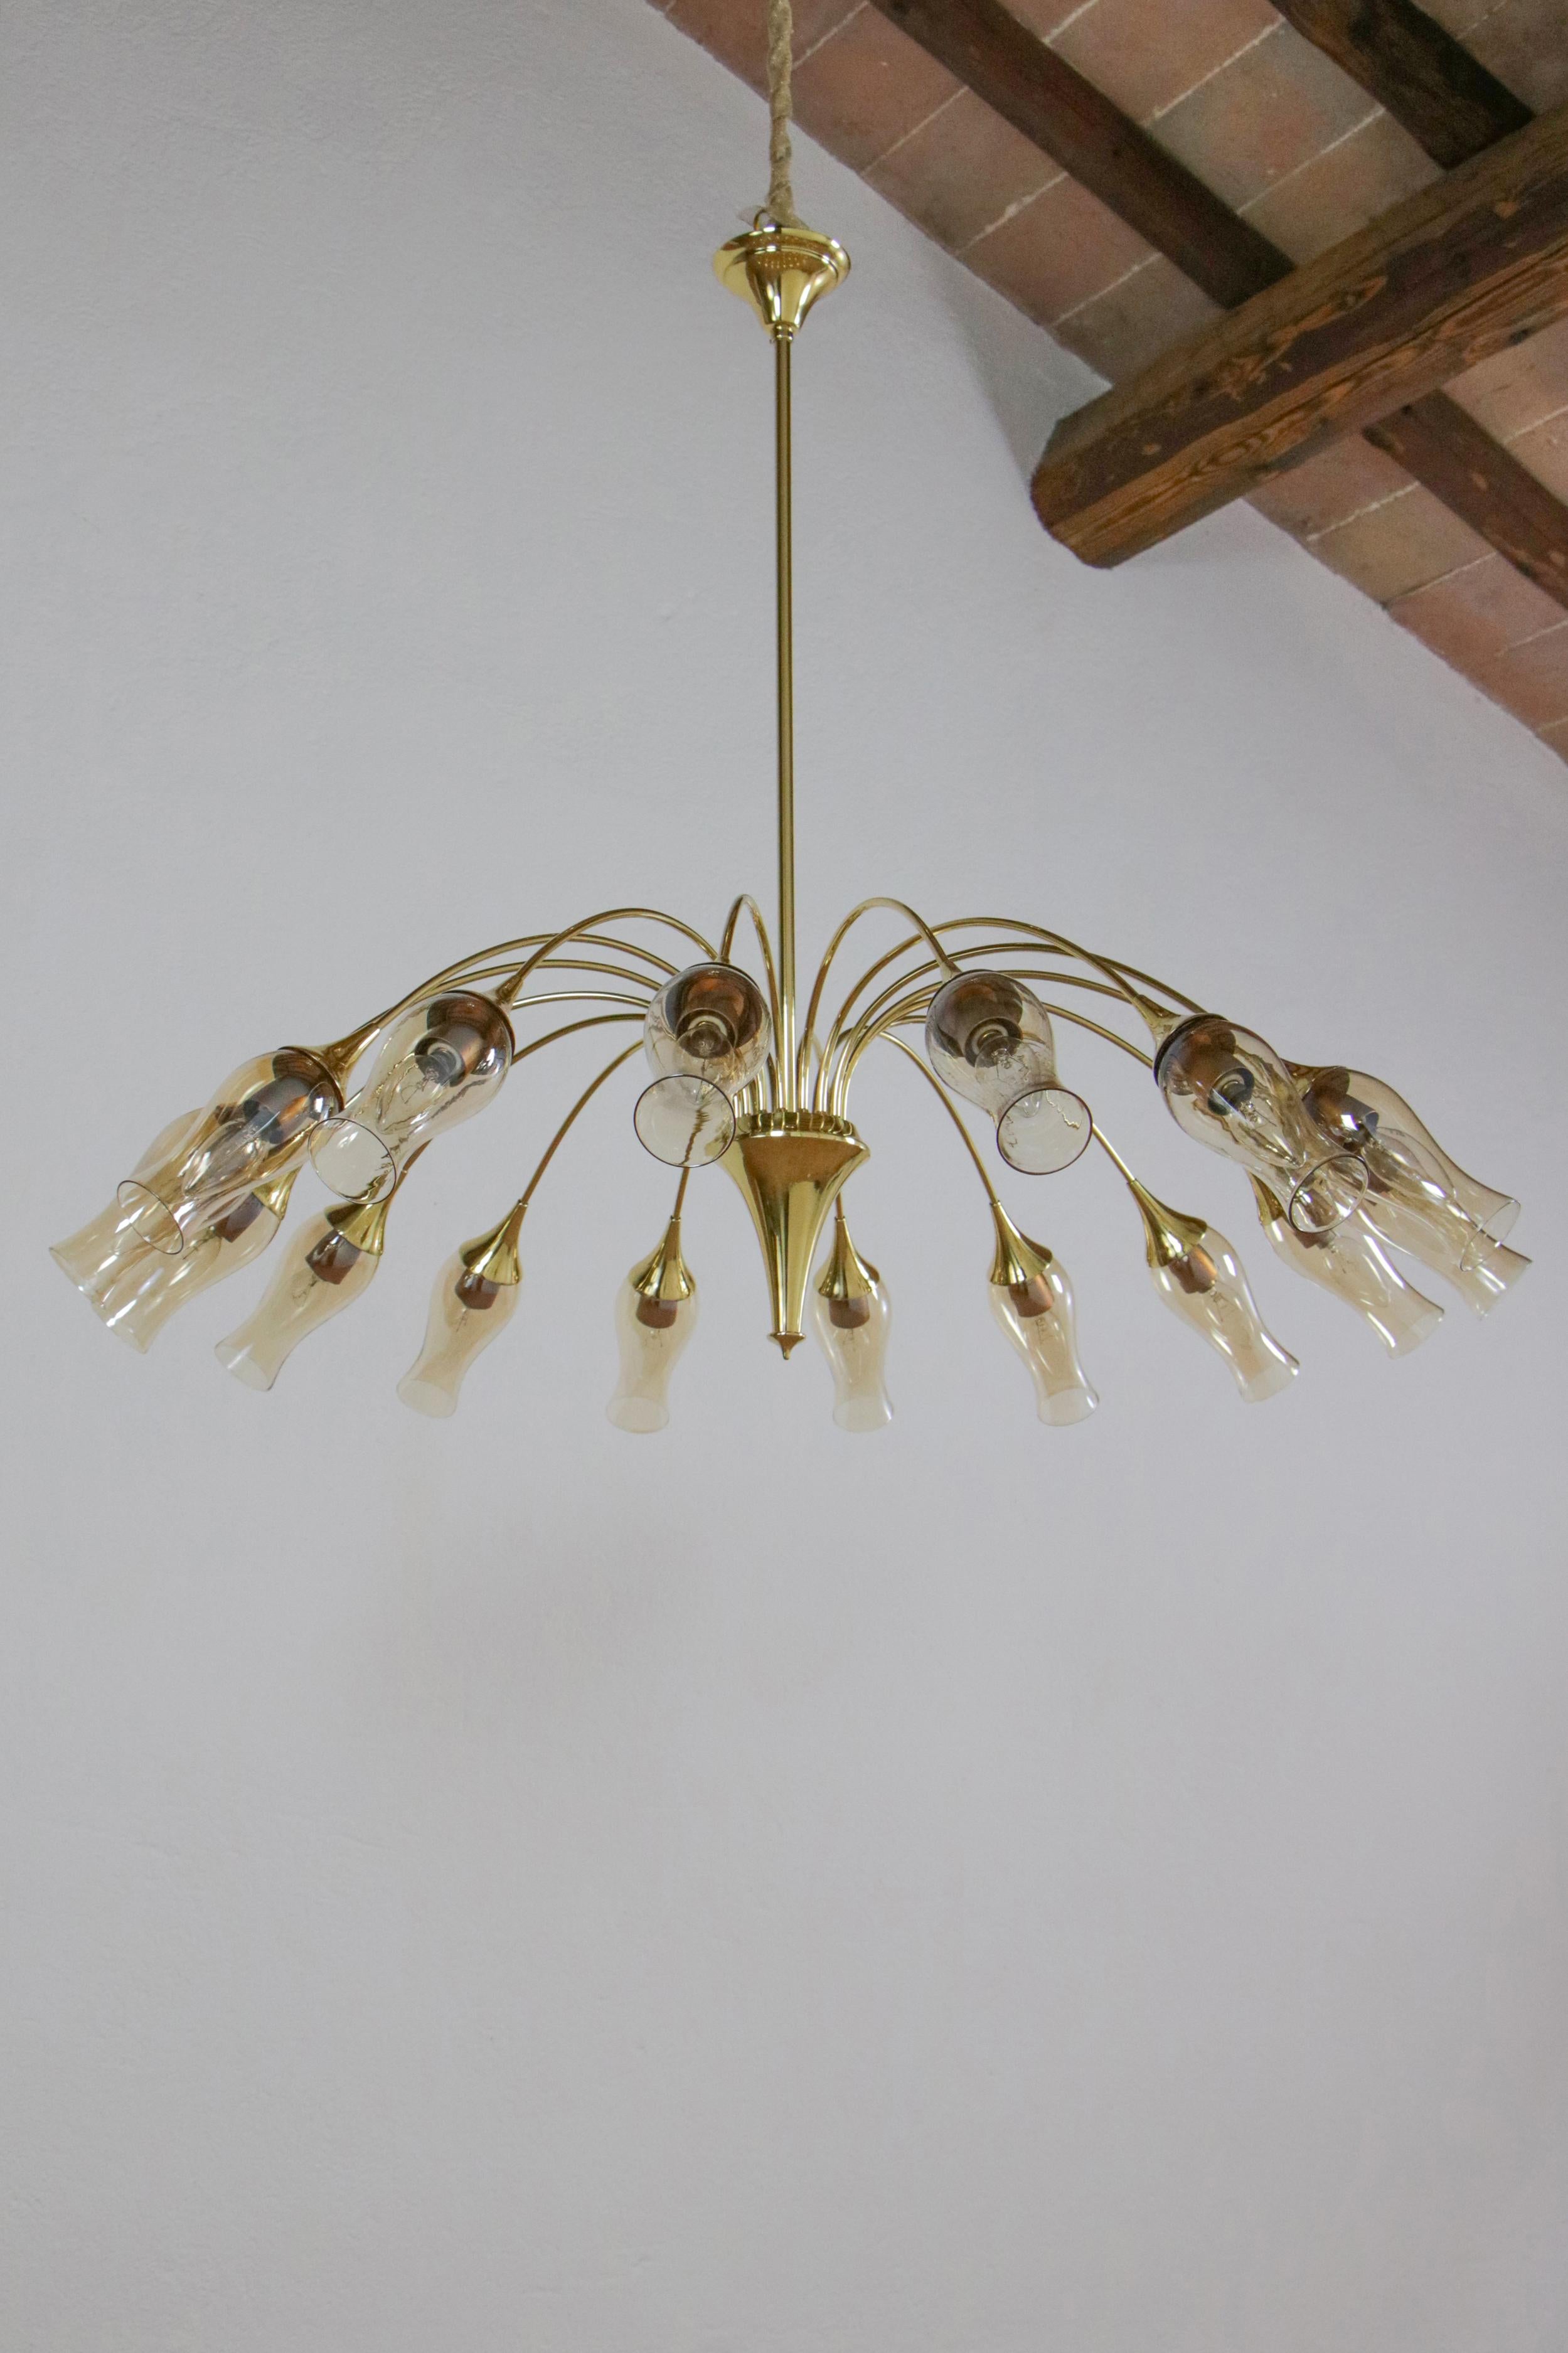 Italian Mid-Century Modern Big Spider Murano Glass Chandelier, Gold Color, 1950s In Good Condition For Sale In Traversetolo, IT